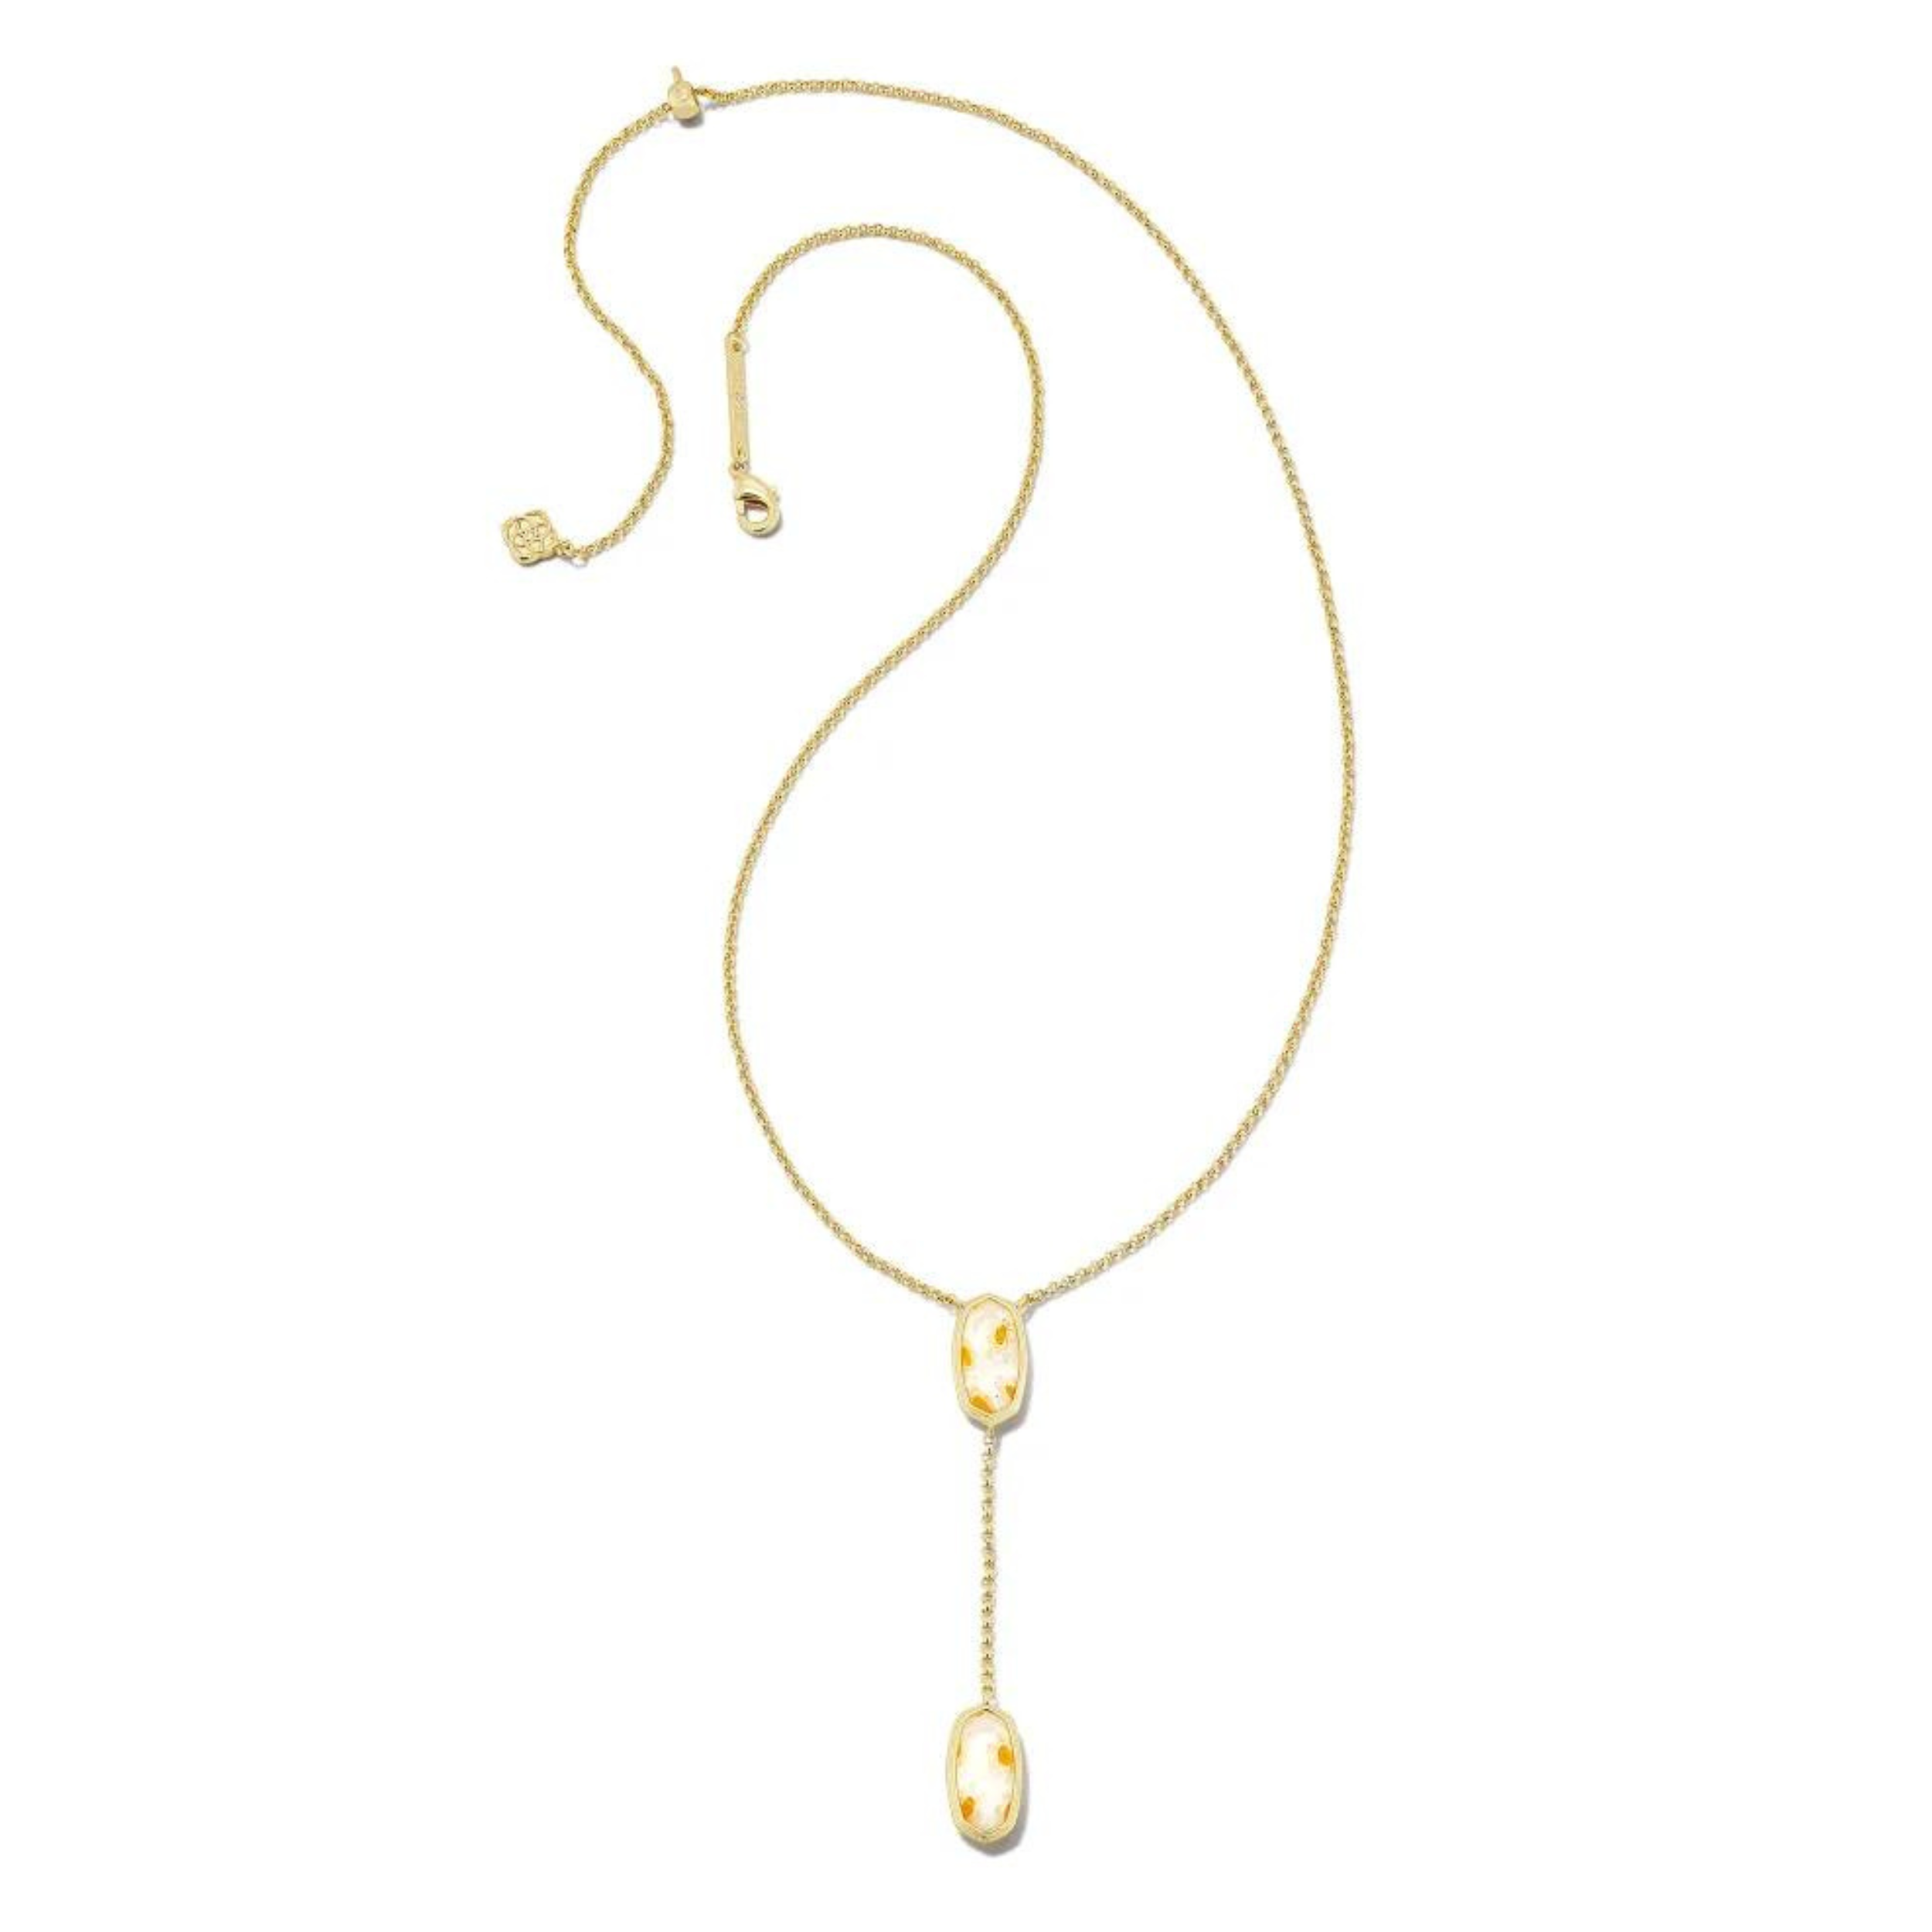 Kendra Scott | Elisa Y Framed Neklace in Gold White Mosaic Glass - Giddy Up Glamour Boutique